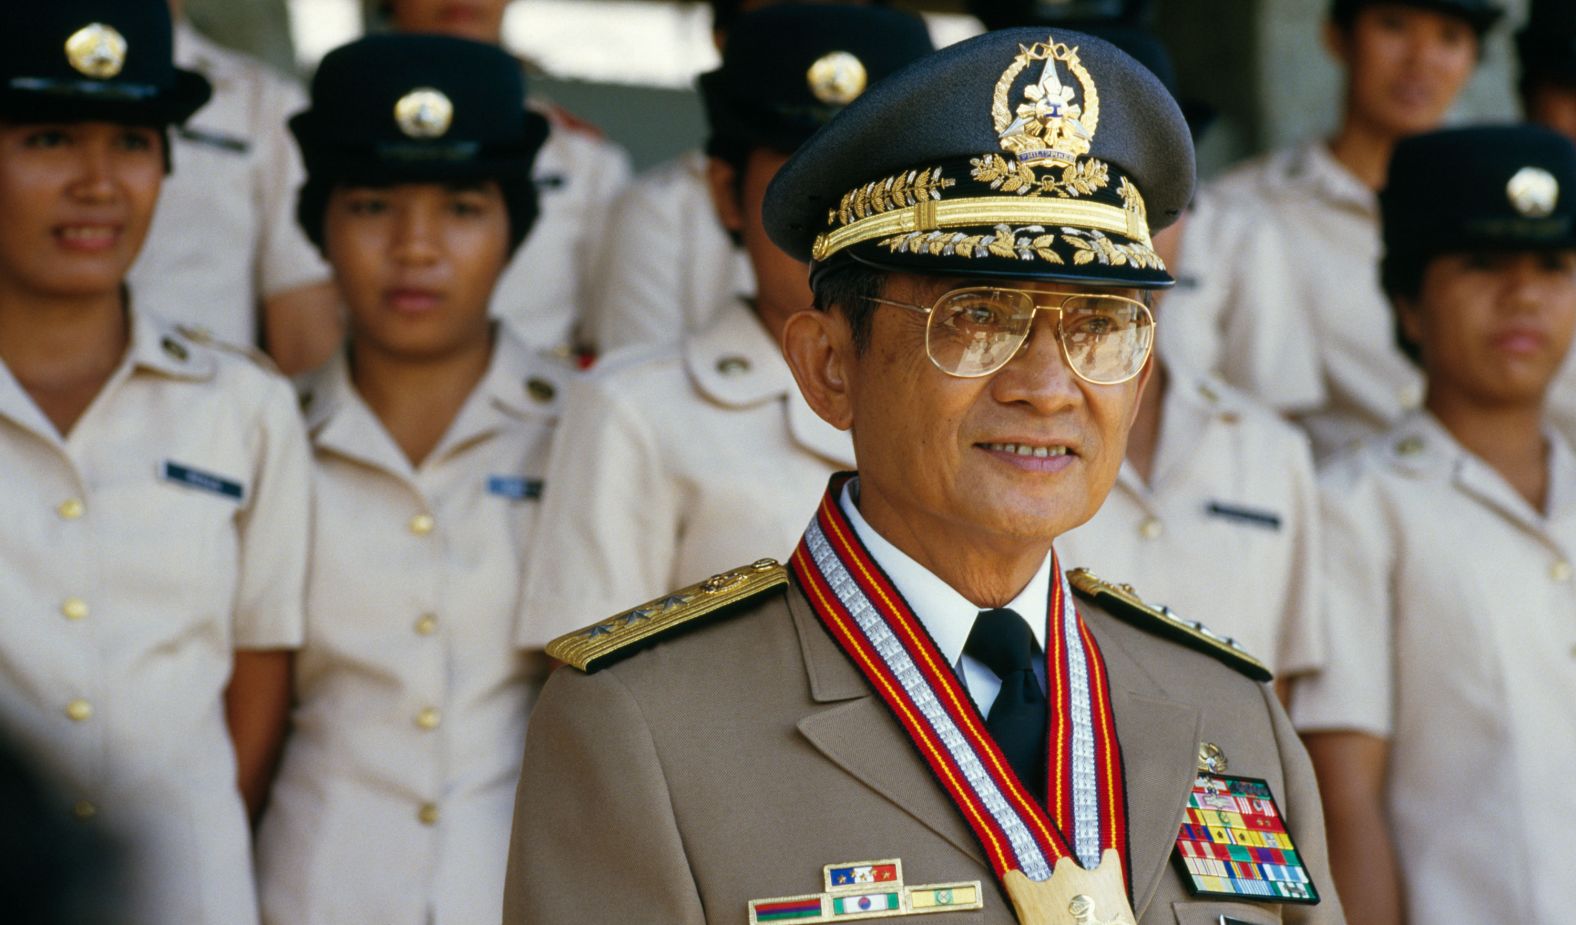 Former Philippine President <a href="index.php?page=&url=https%3A%2F%2Fwww.cnn.com%2F2022%2F07%2F31%2Fasia%2Fphilippine-former-president-fidel-ramos-dies-intl-hnk%2Findex.html" target="_blank">Fidel Valdez Ramos</a> died July 31 at the age of 94. Ramos became a hero to many for defecting from the government of Ferdinand Marcos Sr., spurring the dictator's downfall during the 1986 popular uprising against his rule.